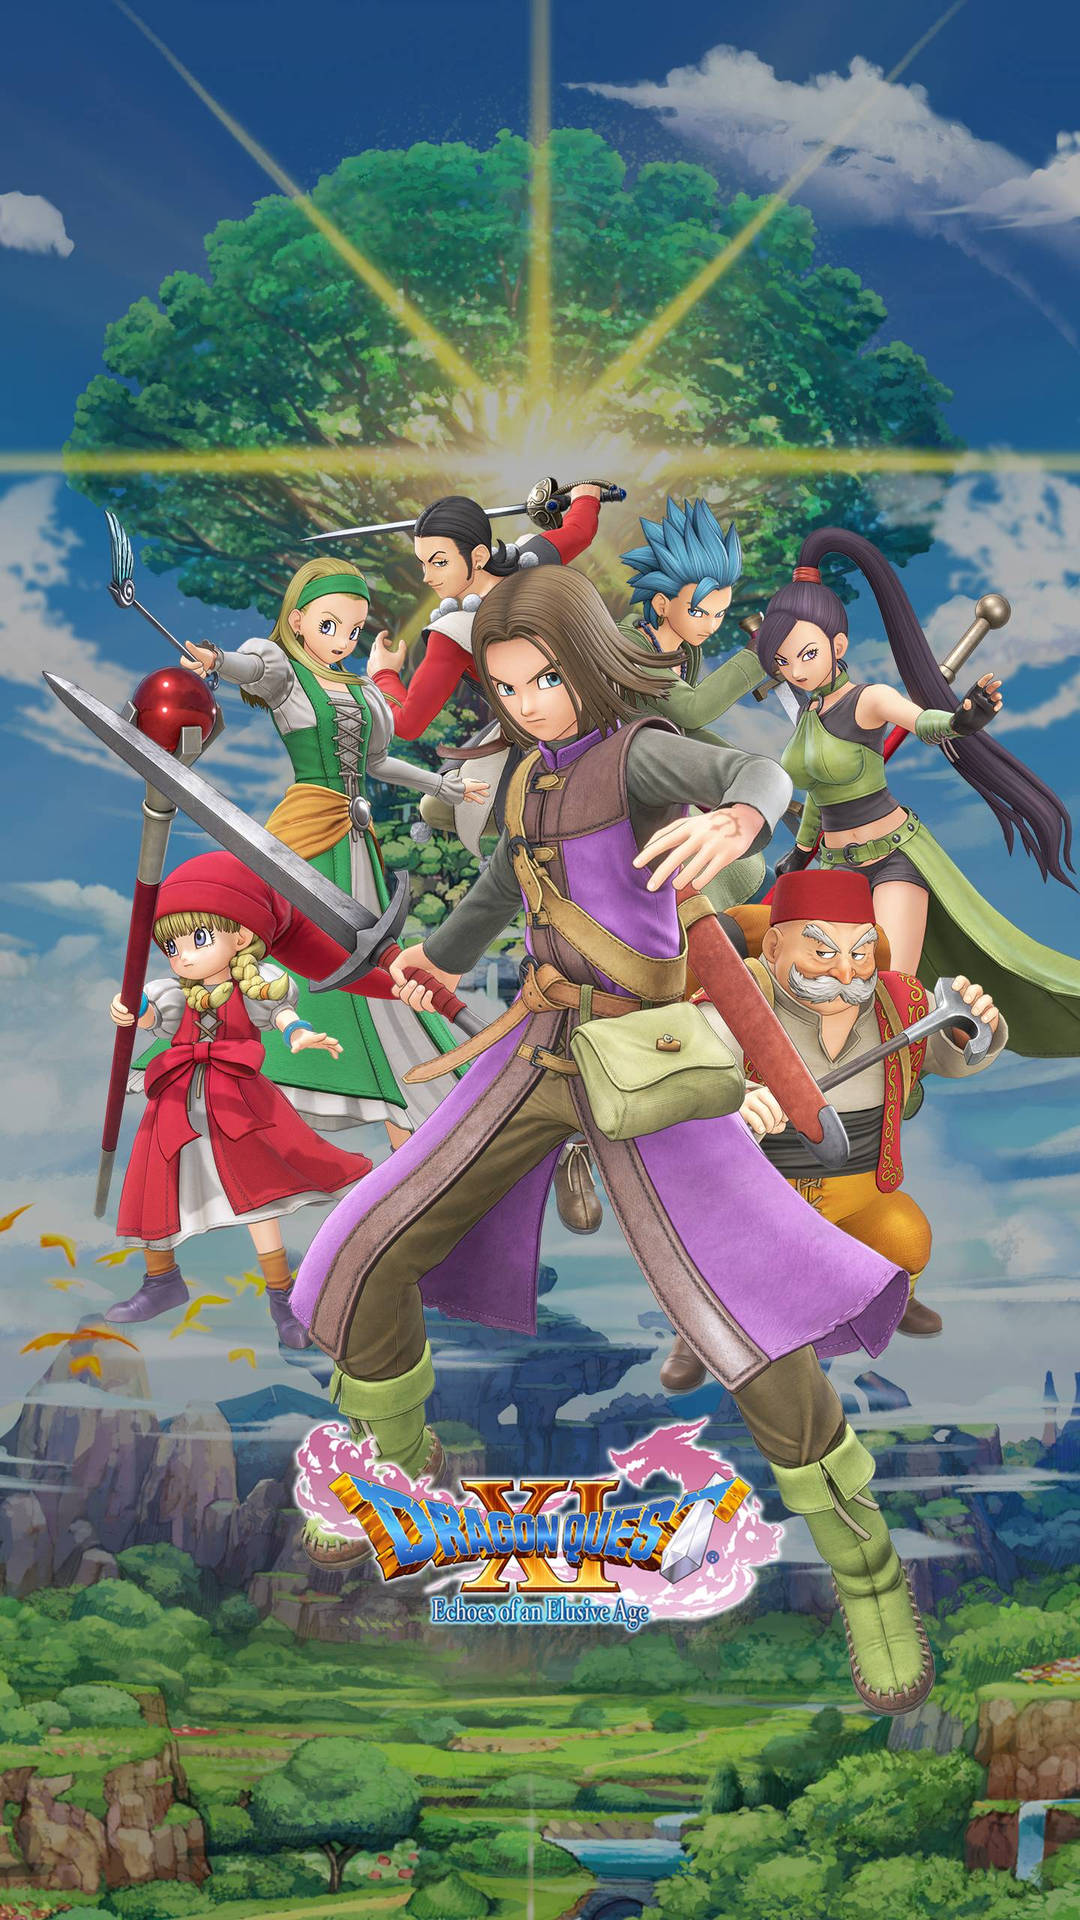 Playing Dragon Quest on your iPhone Wallpaper